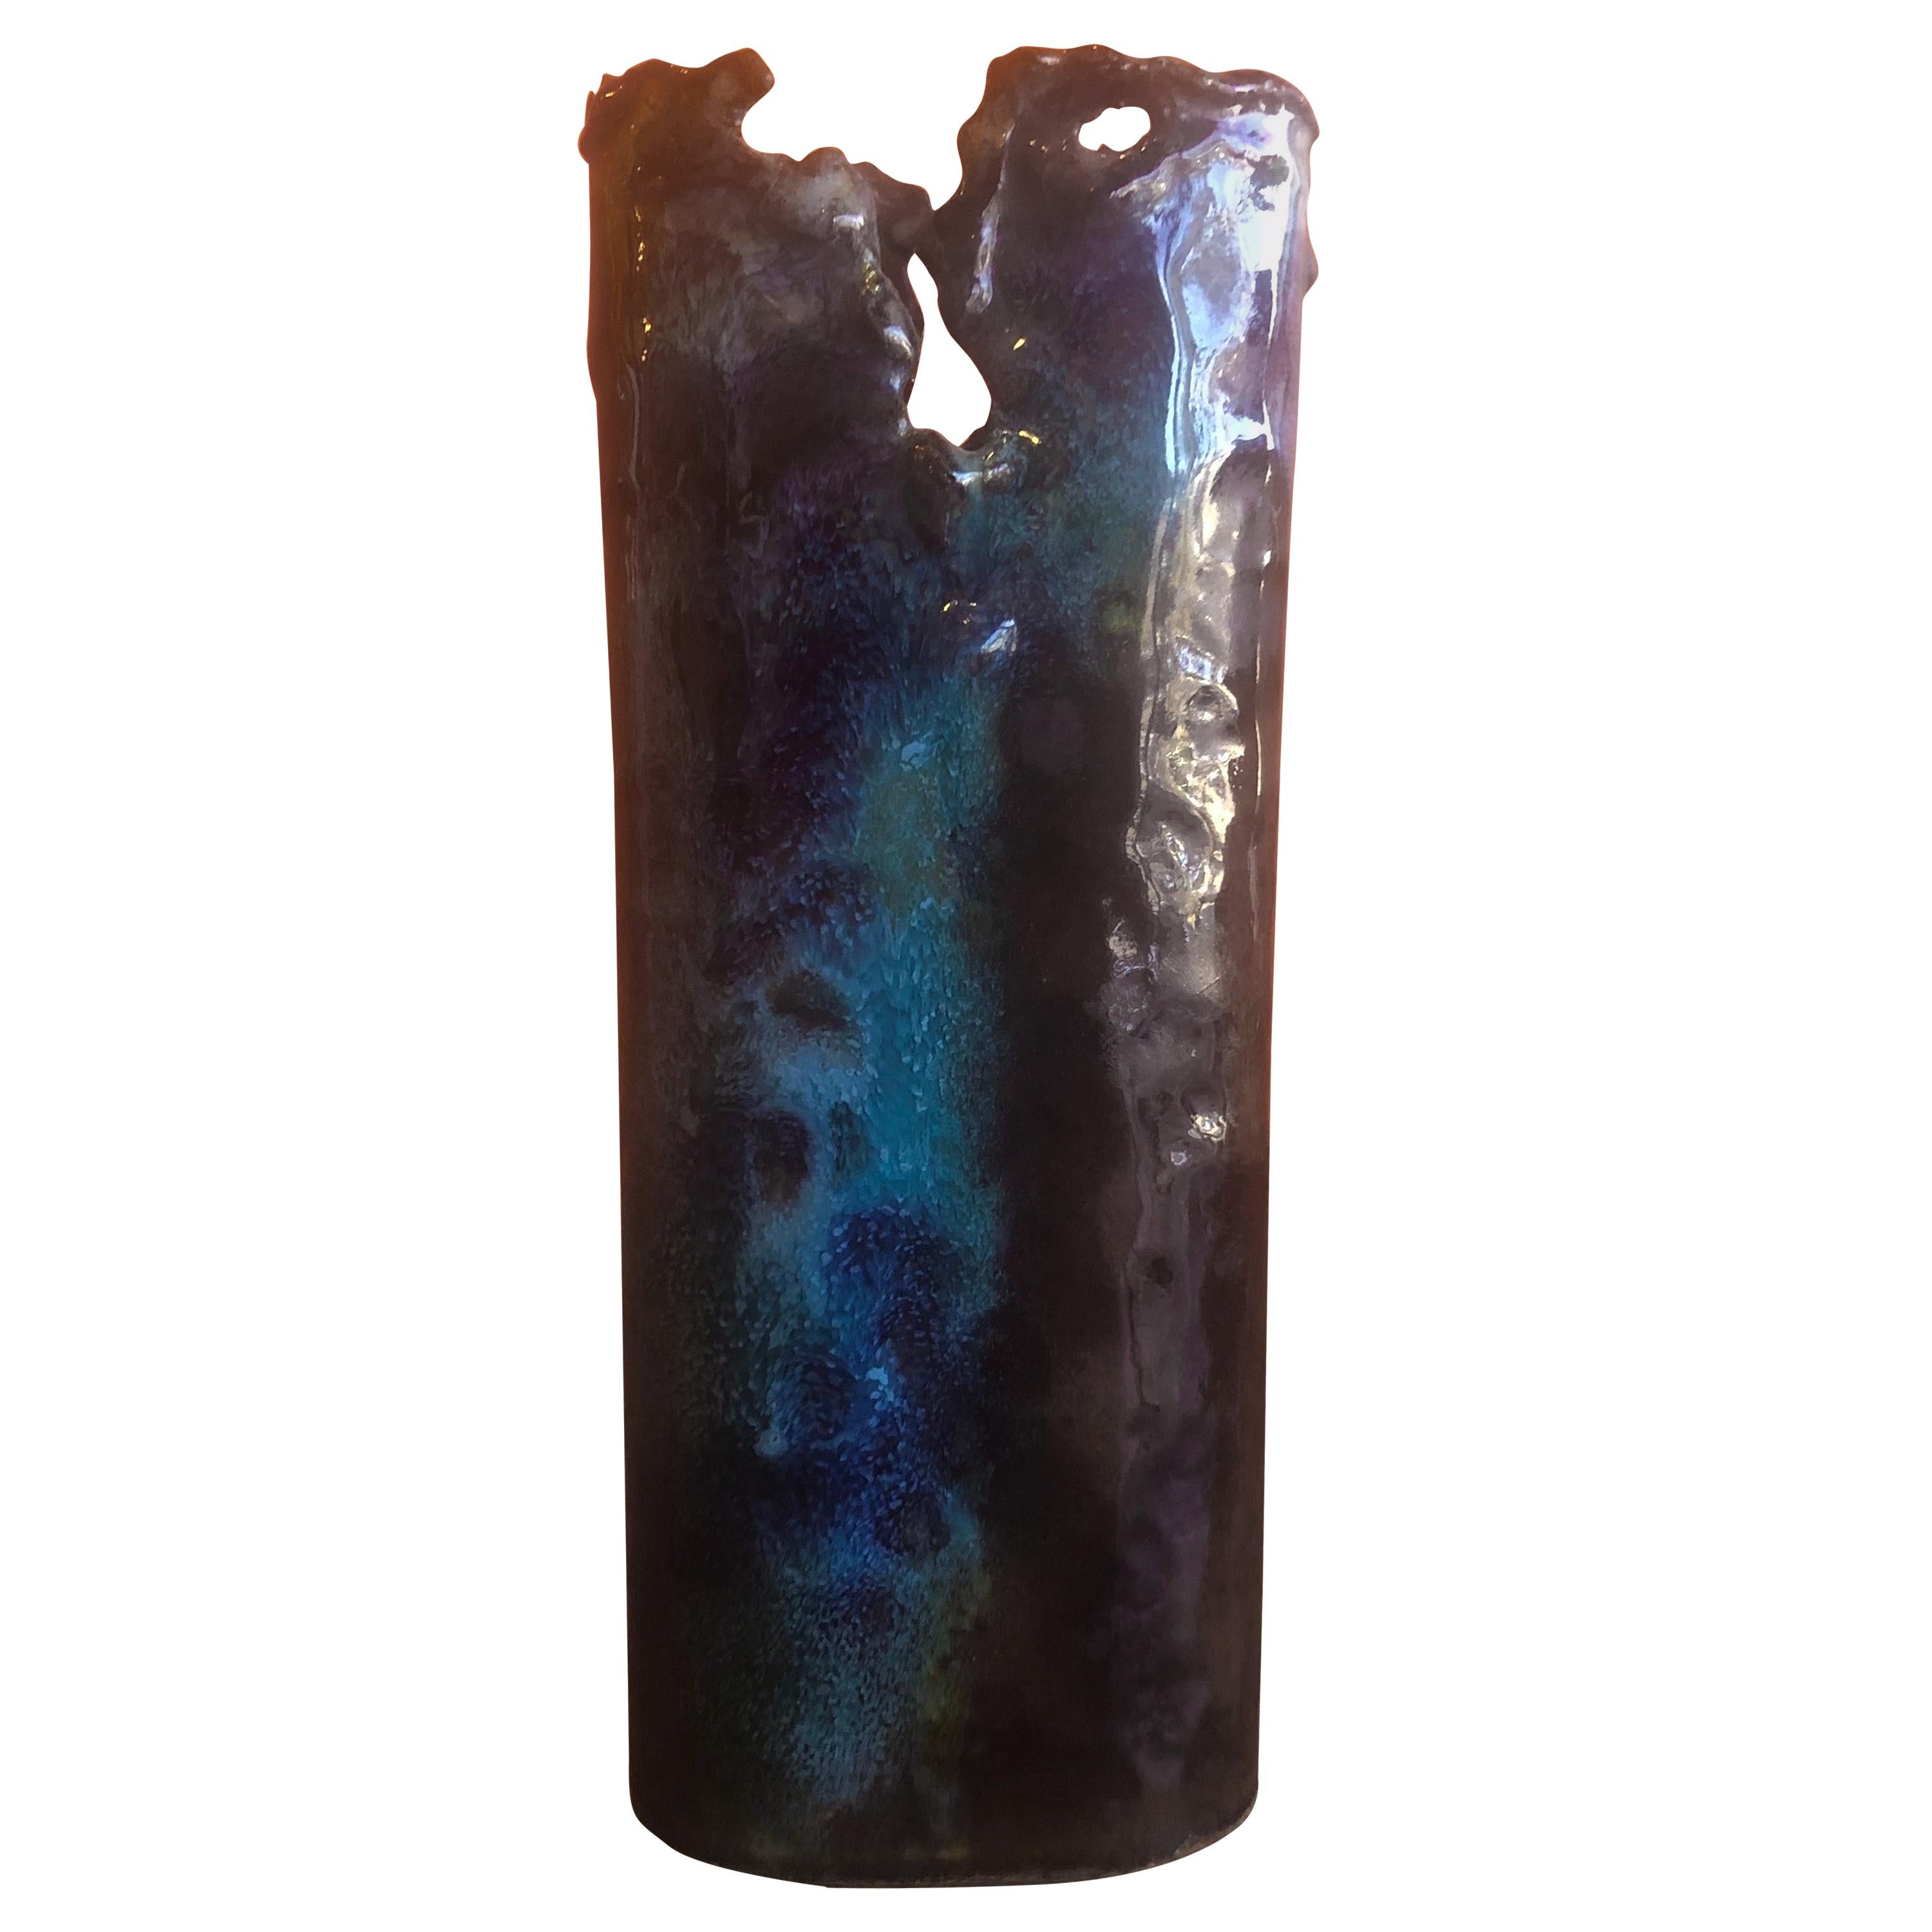 Brutalist Copper Vase with Blue & Brown Enamel Overlays by Rita Brierton For Sale